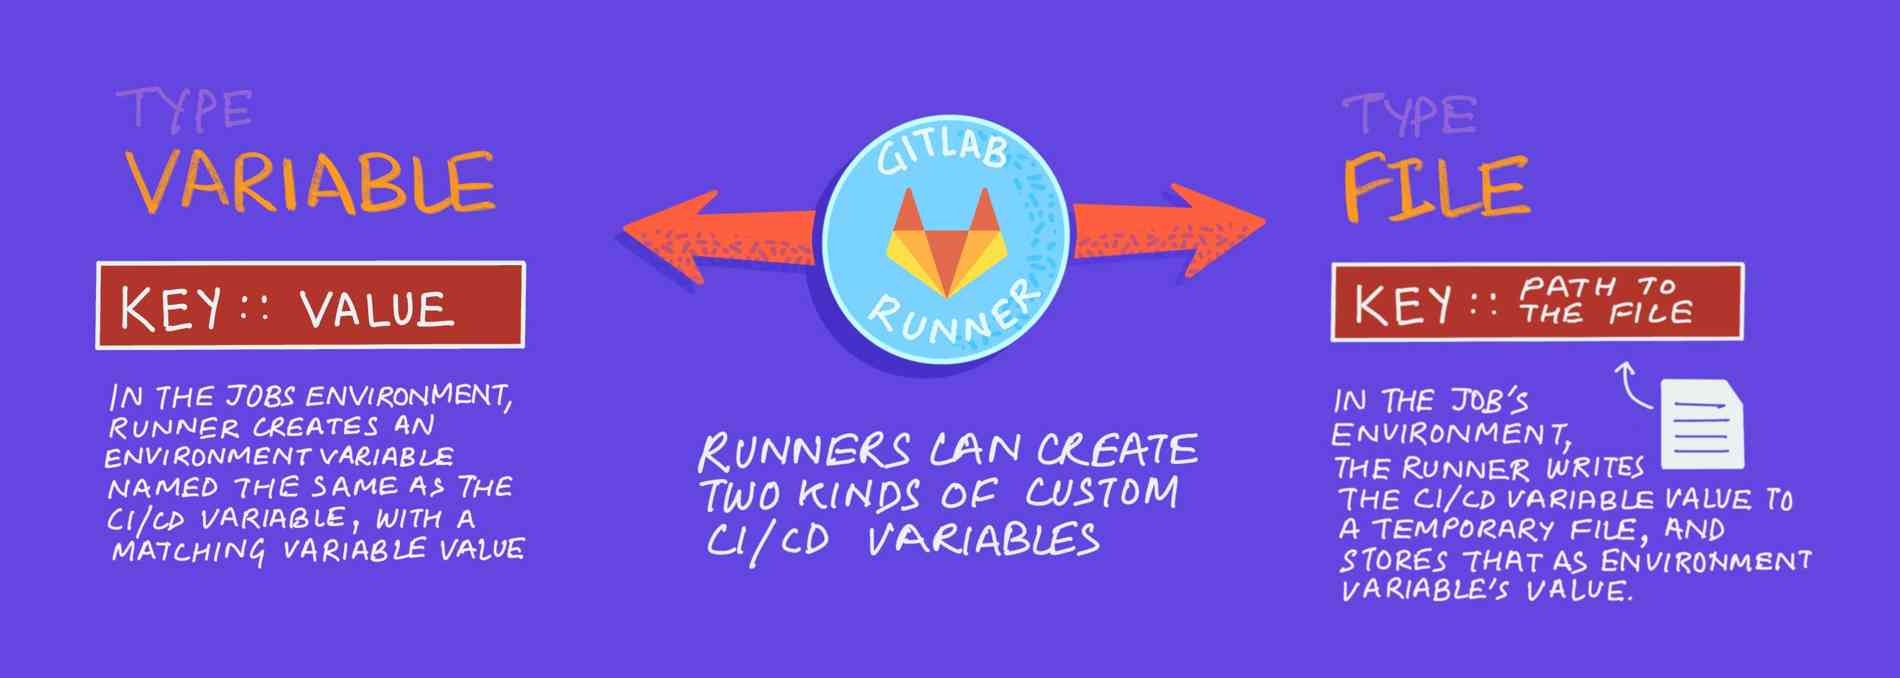 Runners can create two kinds of custom CI/CD variables: Type and File.